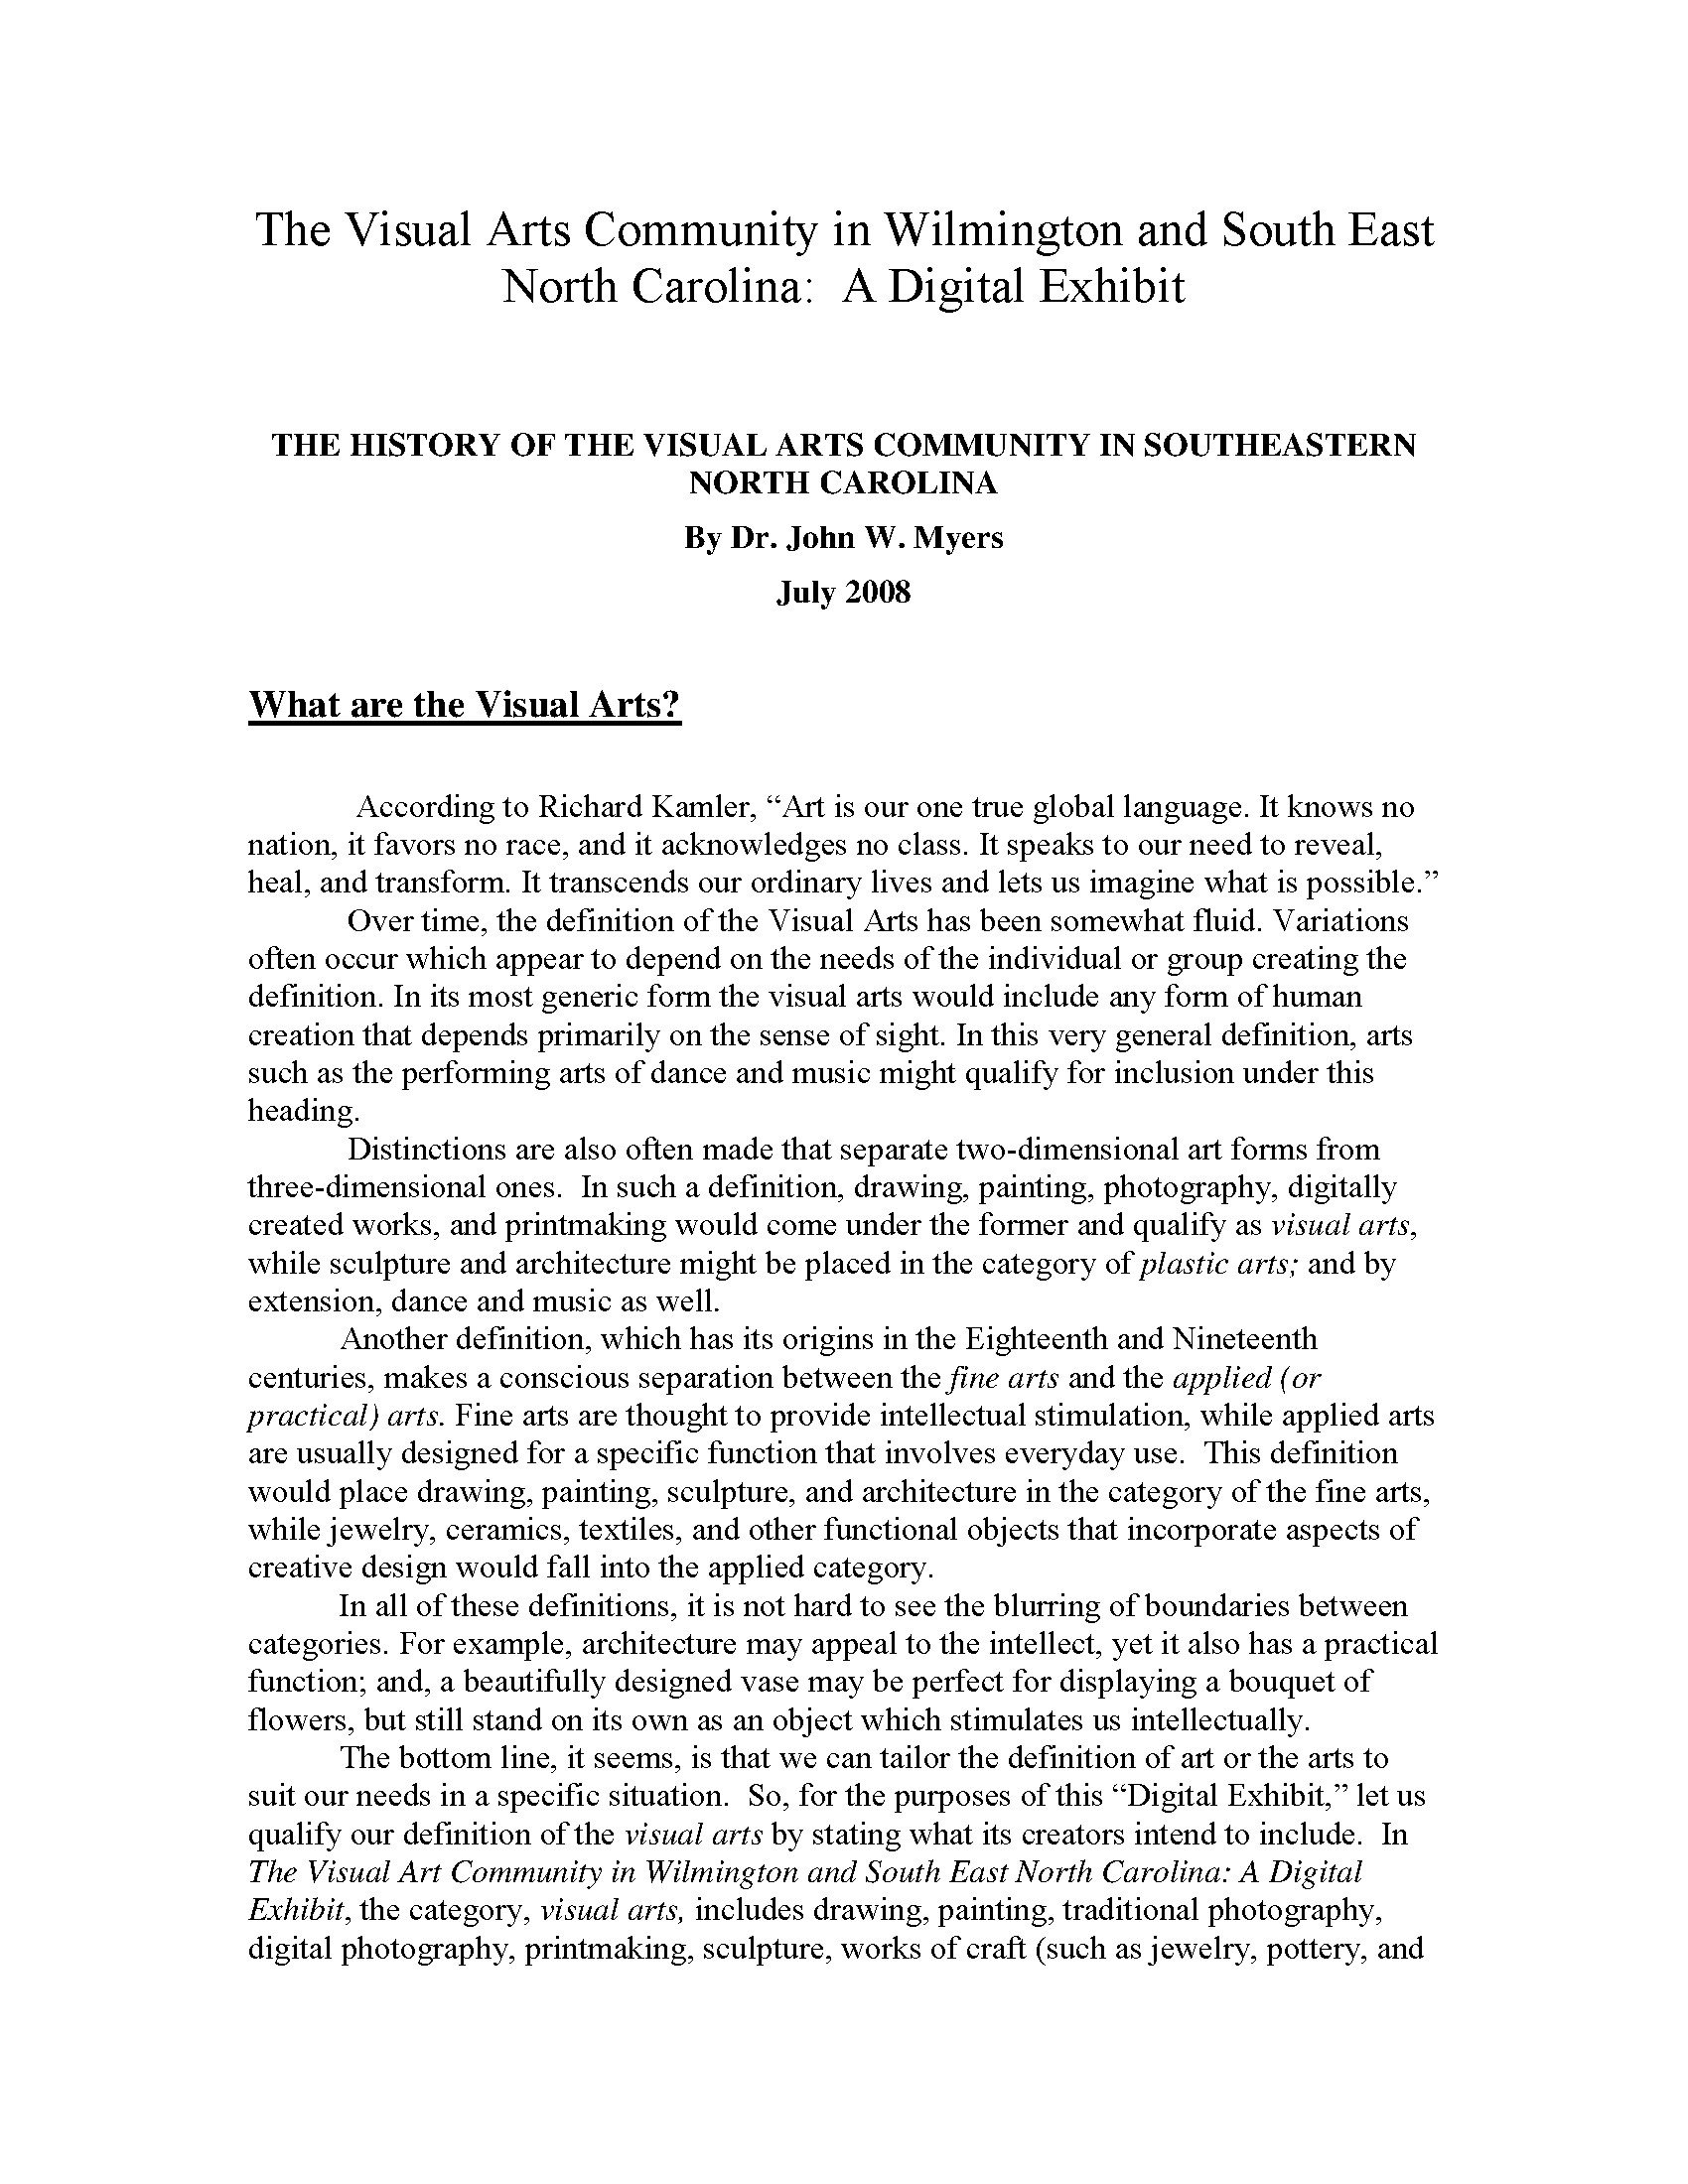 22 Great Global Views Vase 2024 free download global views vase of the history of the visual arts community in southeastern north within the history of the visual arts community in southeastern north carolina